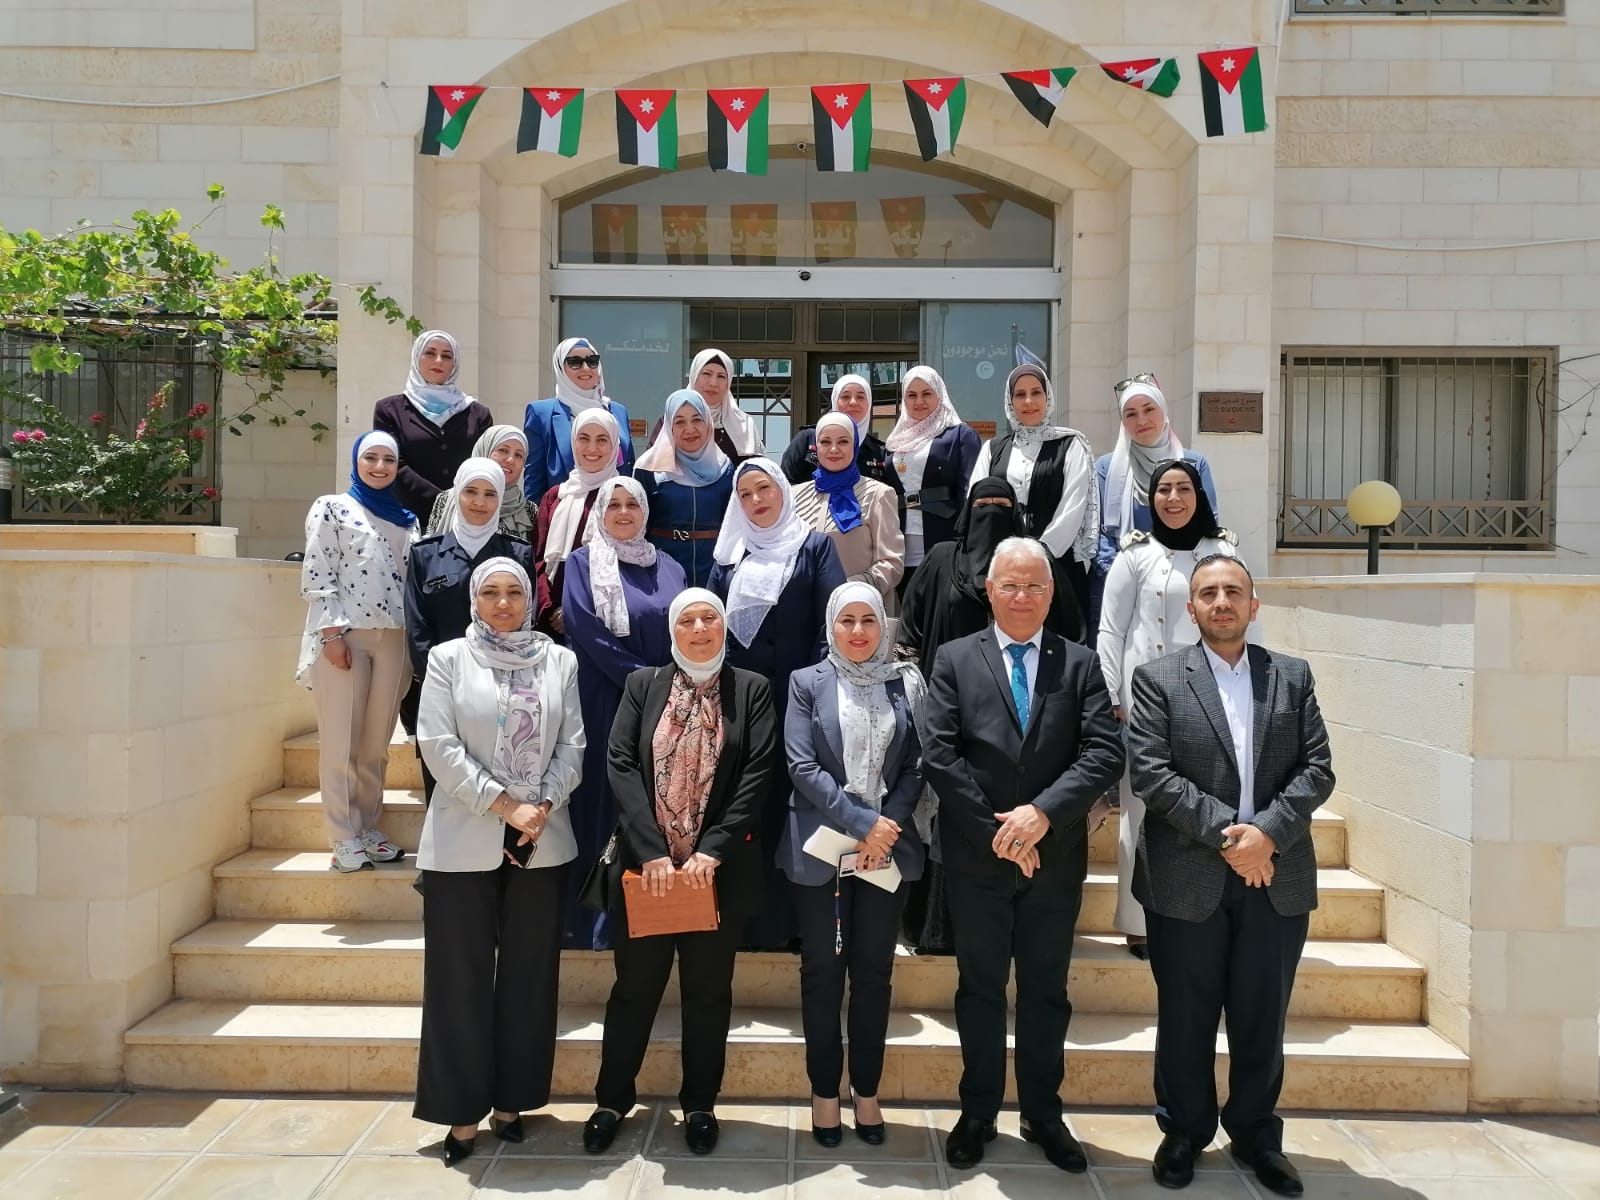 The Jordanian Maritime Authority celebrates the first International Women's Day 2022 in the maritime sector